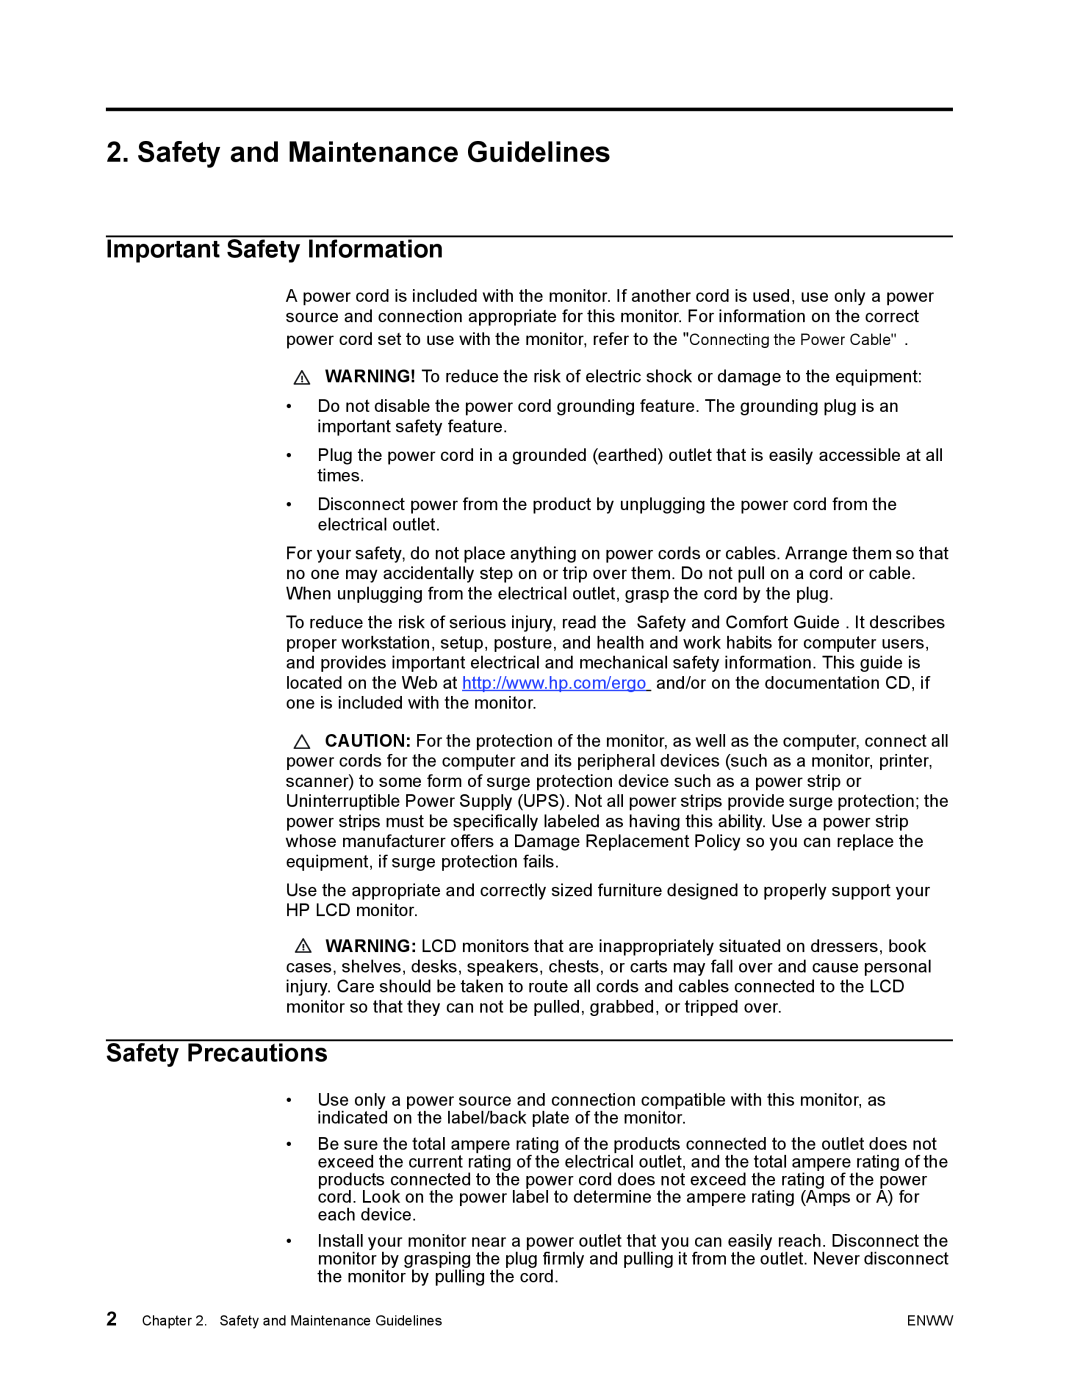 HP S1922 manual Safety and Maintenance Guidelines, Important Safety Information, Safety Precautions 